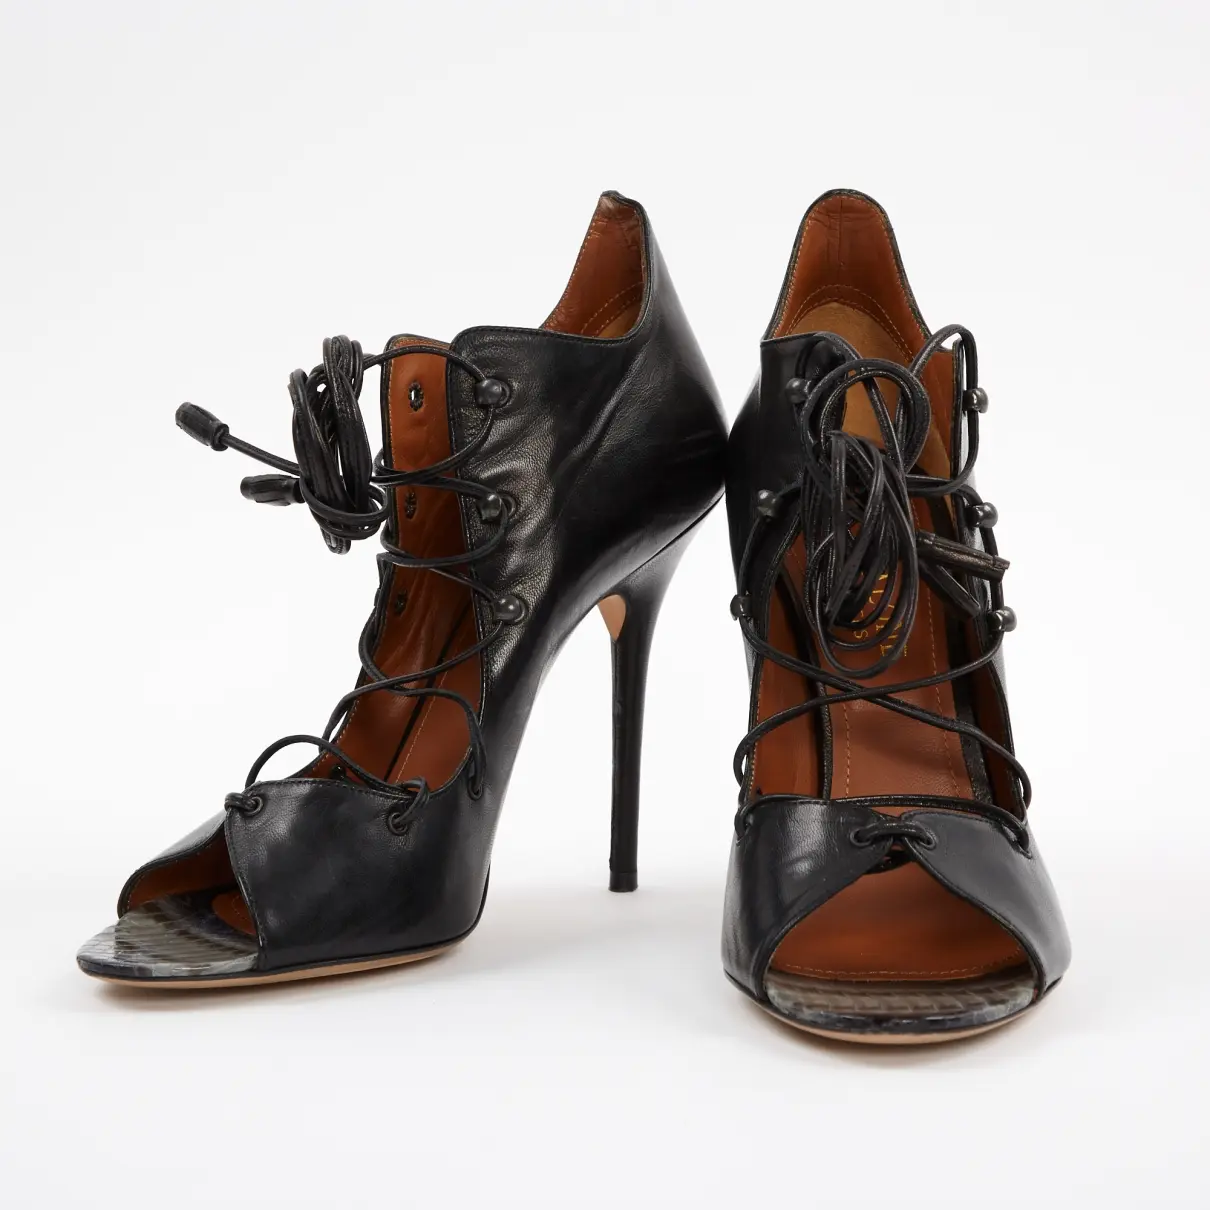 Malone Souliers Leather heels for sale